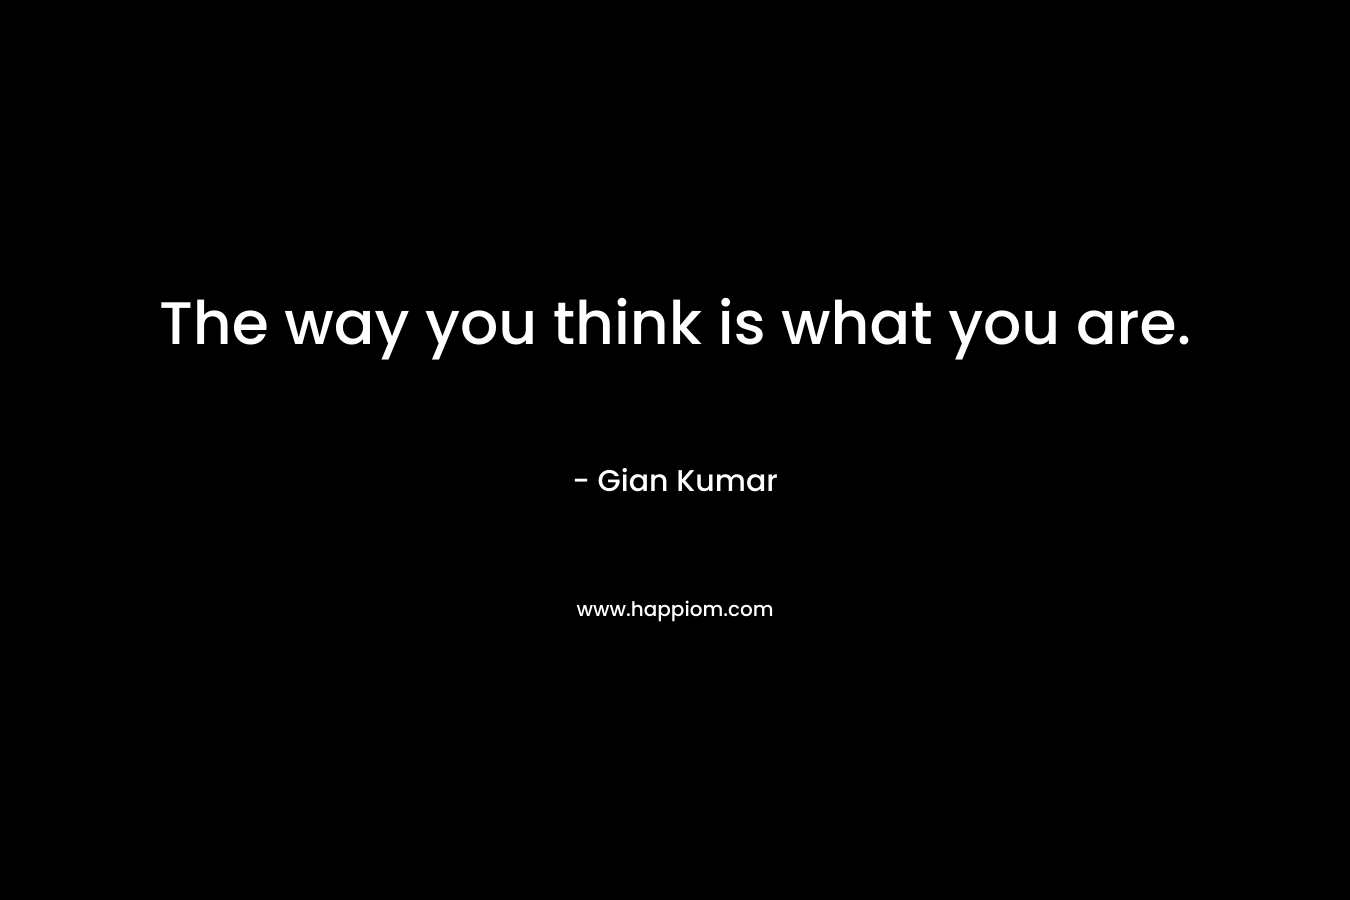 The way you think is what you are. – Gian Kumar